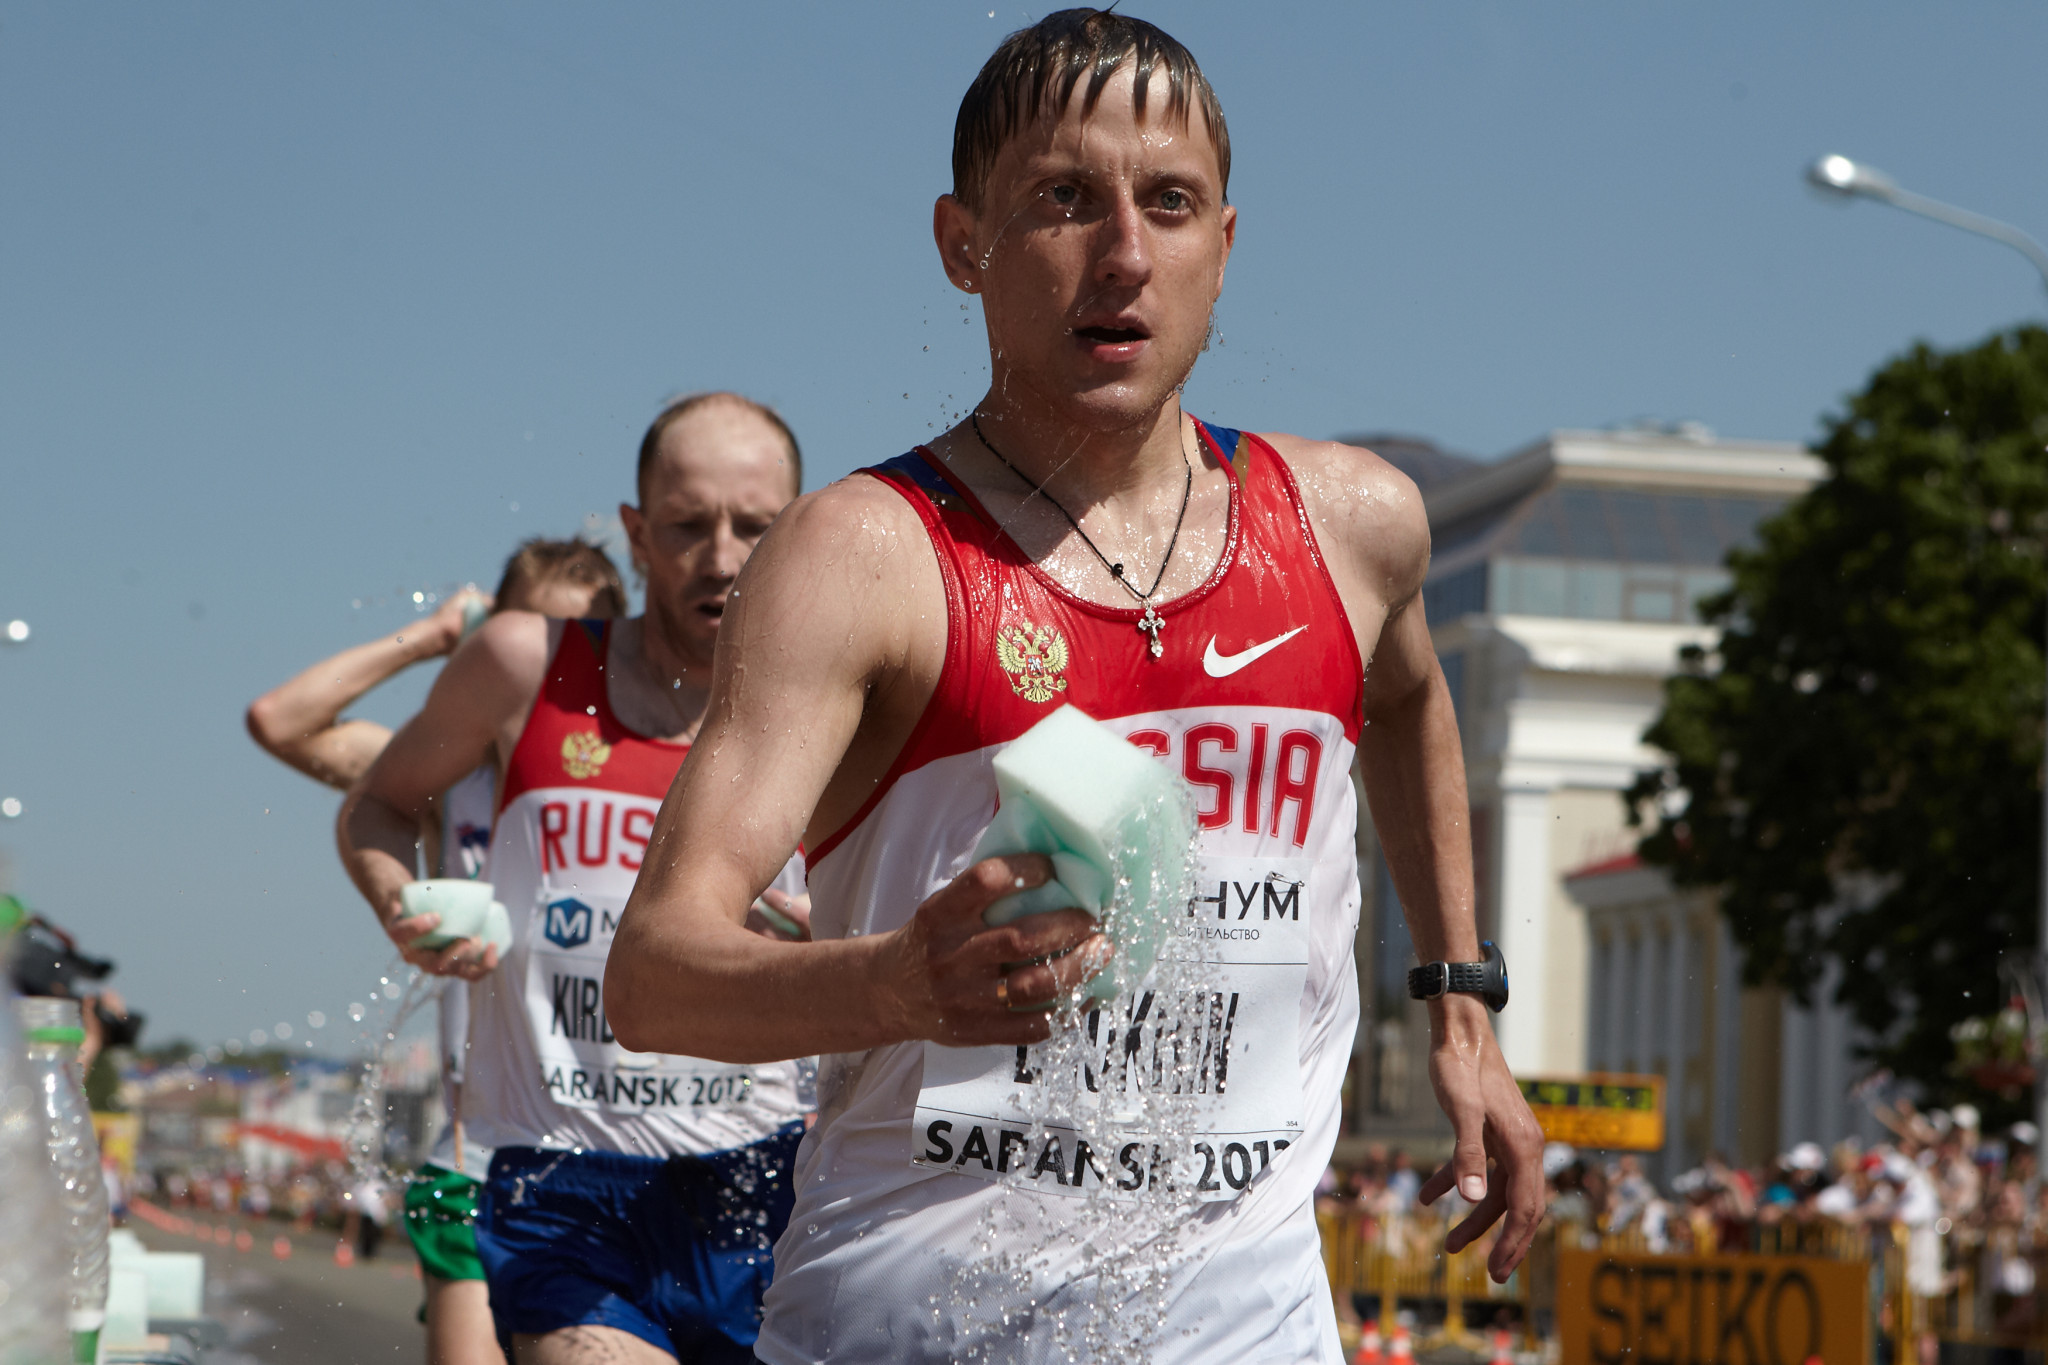 Russian race walker Bakulin handed eight-year doping ban for second offence